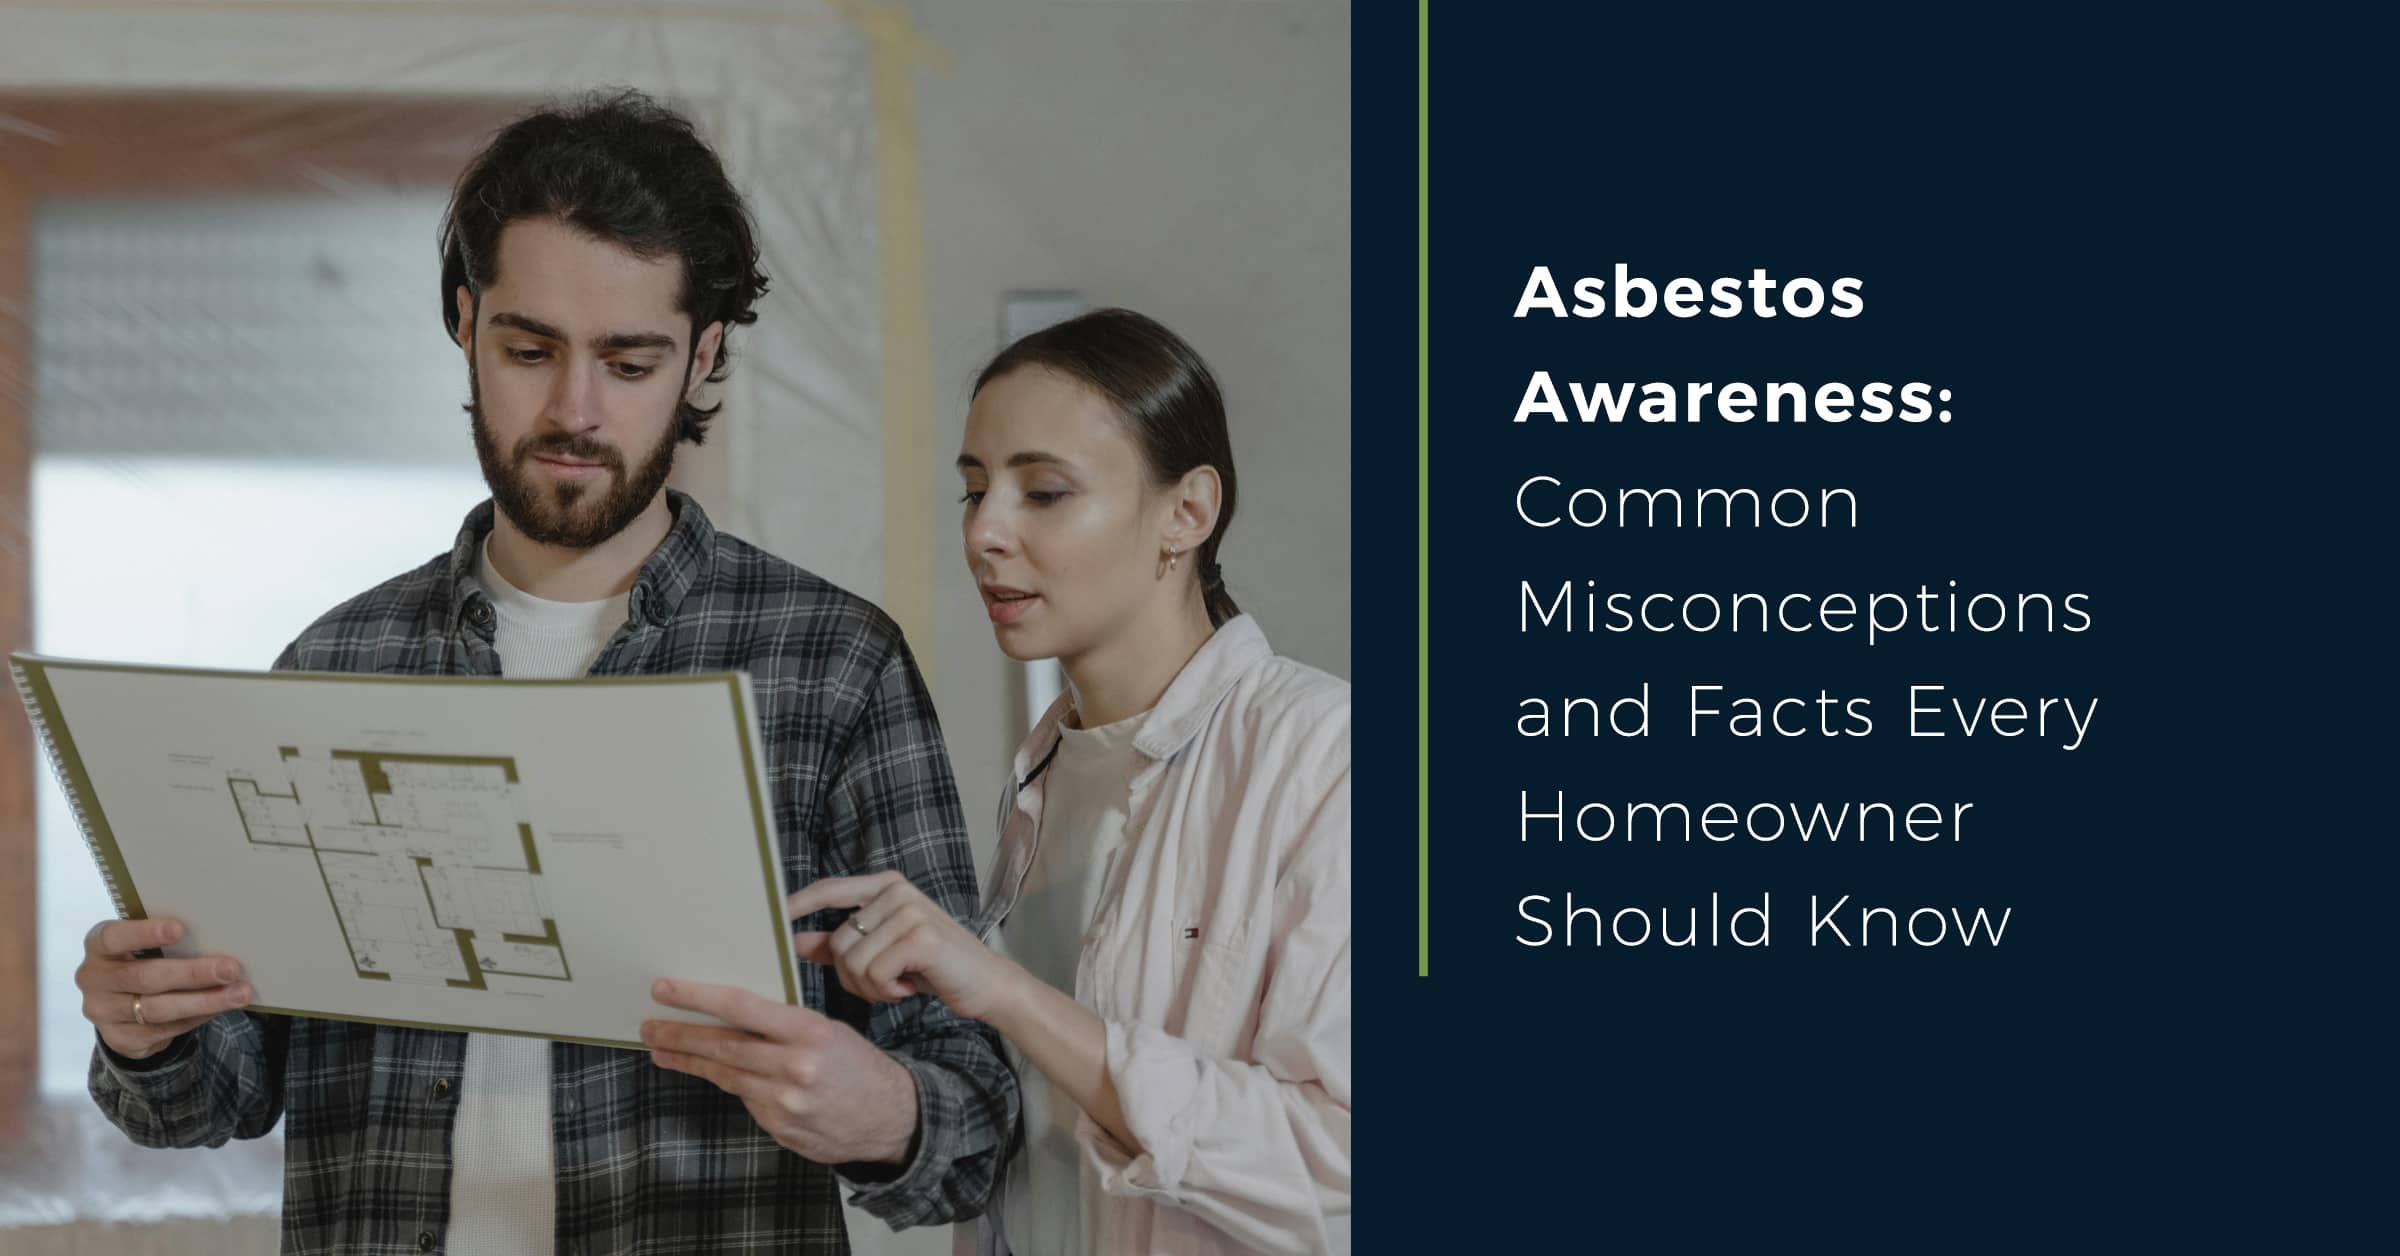 A couple looking at papers, and a headliine that reads Asbestos Awareness: What Every Homeowner Should Know